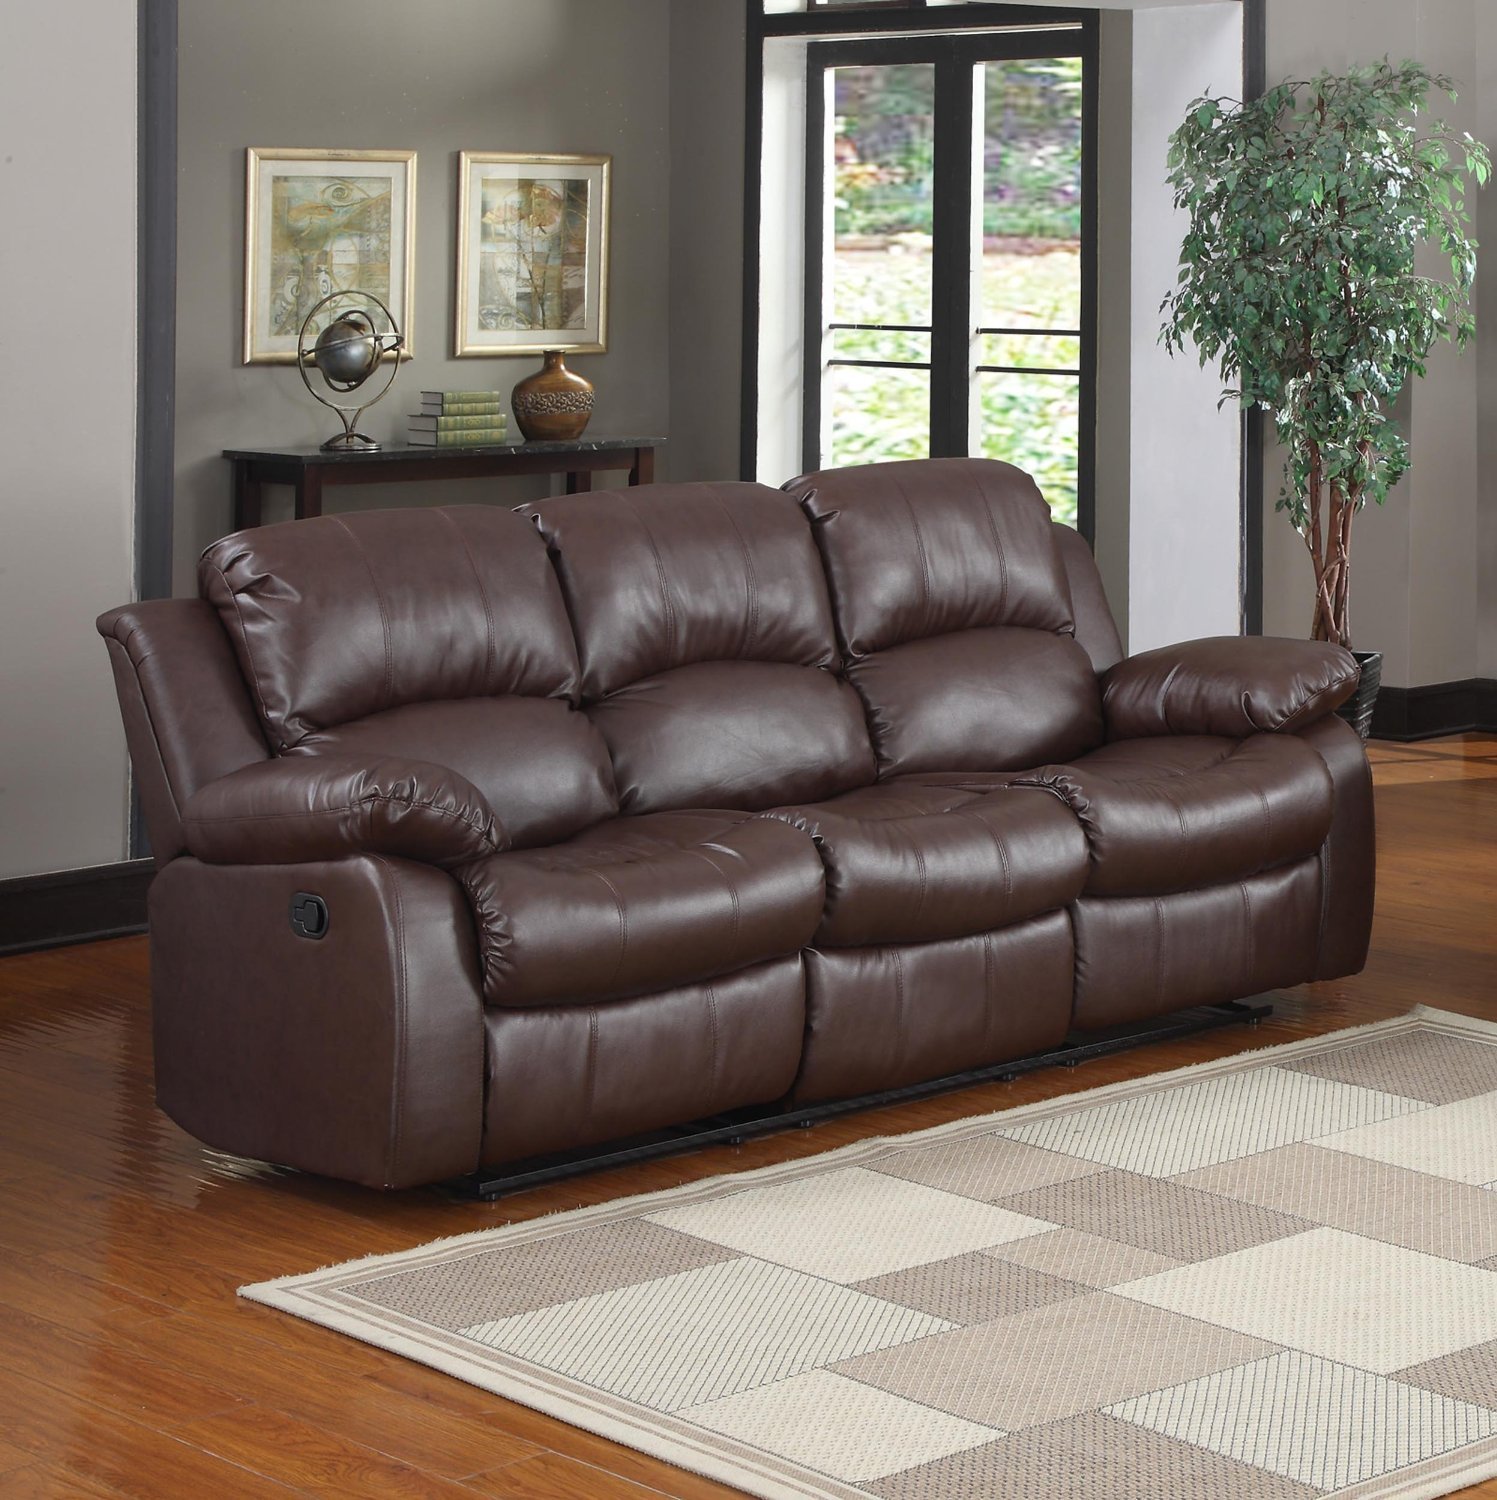 Leather Reclining Sofa for Added Comfort in Living Room